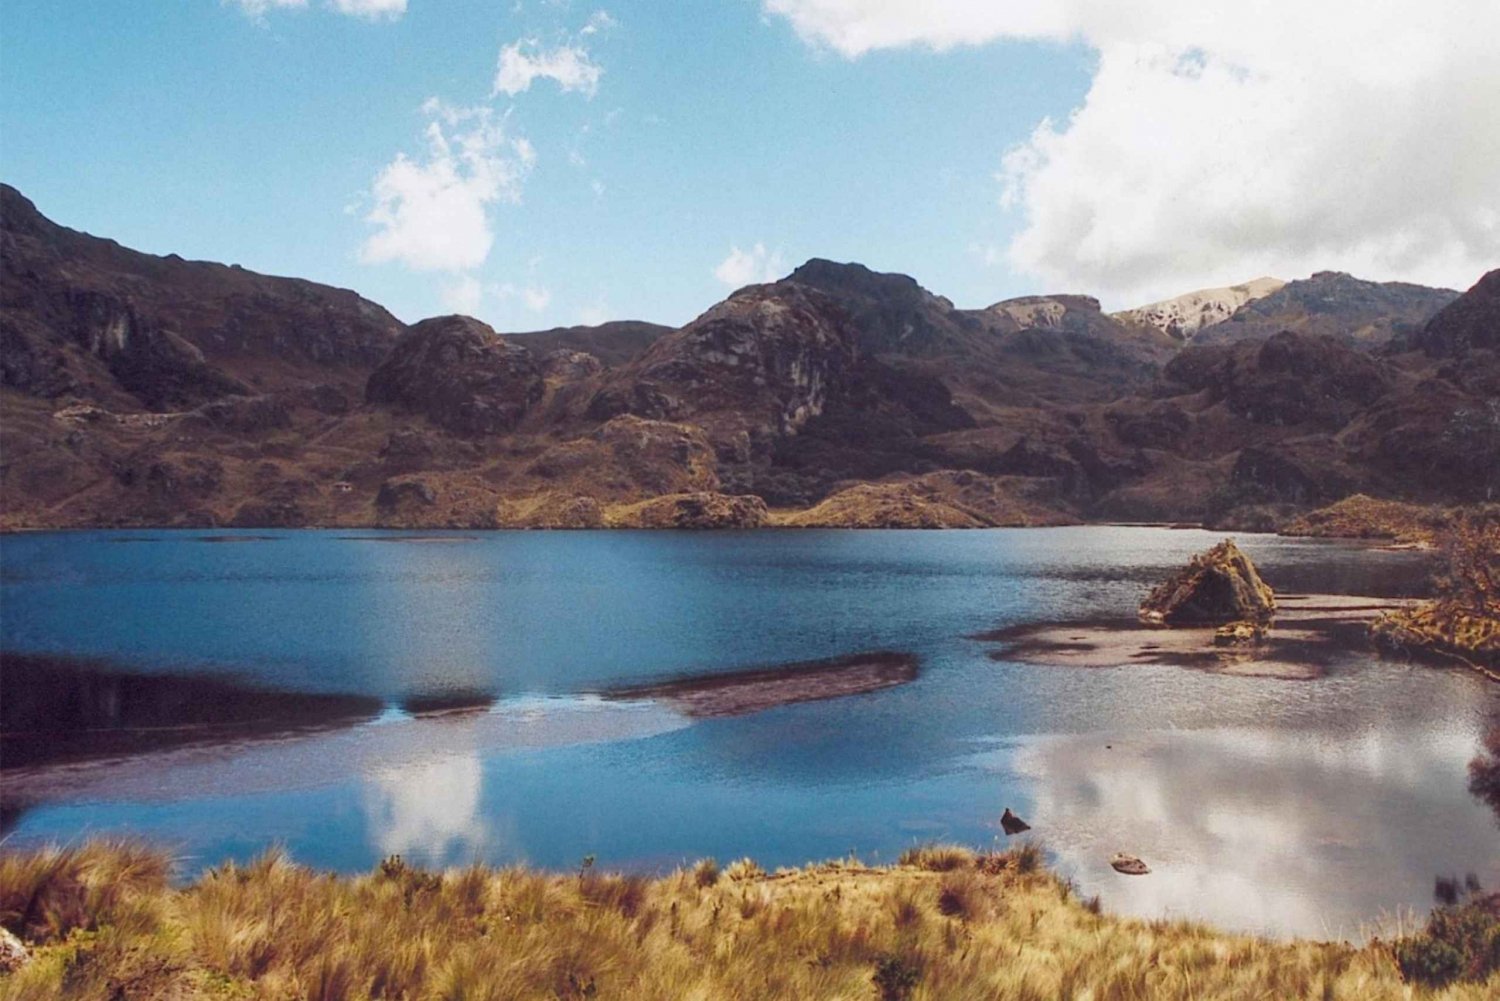 Cajas National Park Guided Day Hike